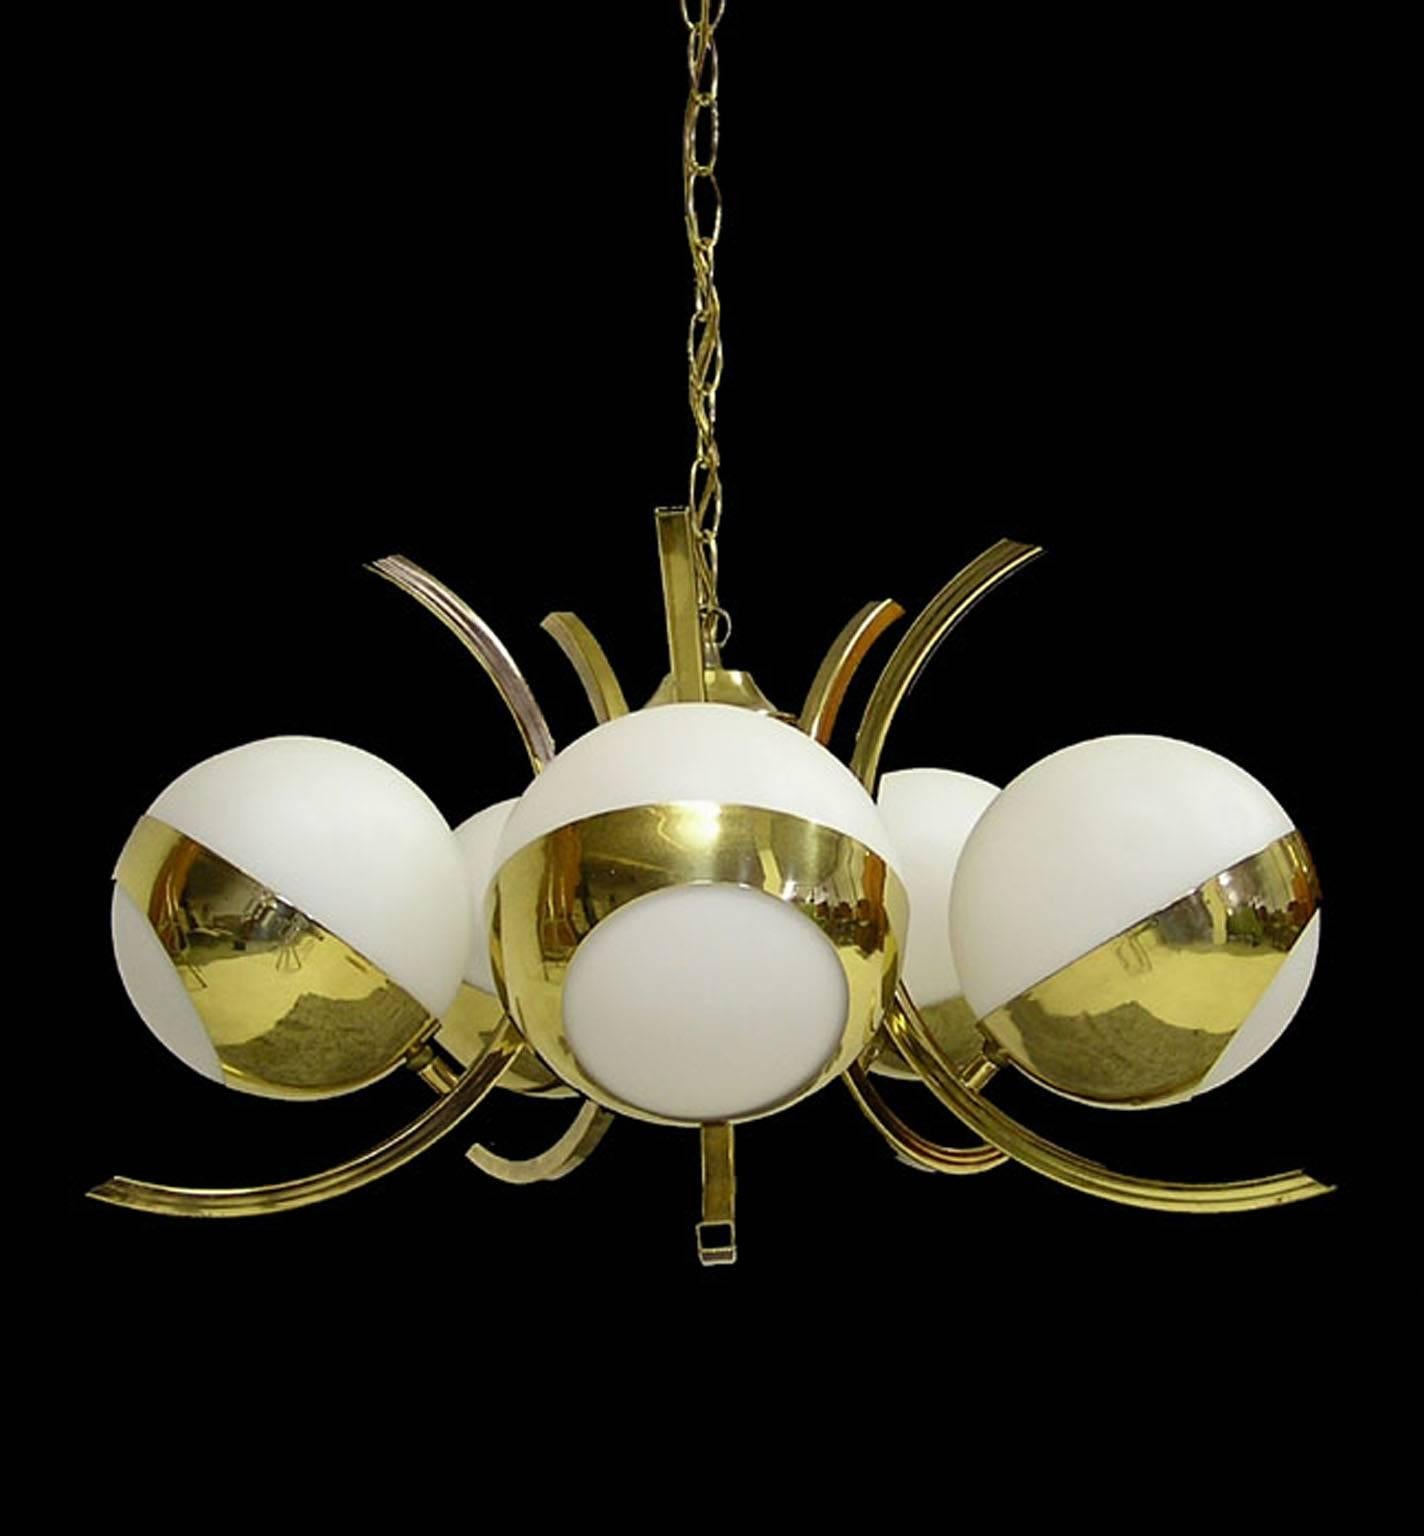 A stunning five-light brass chandelier from the 1970s by Stilnovo of Italy. Well constructed and designed featuring arced brass arms that support the elliptical brass supports for the frosted glass globes. Operates via a switch located on the 13'